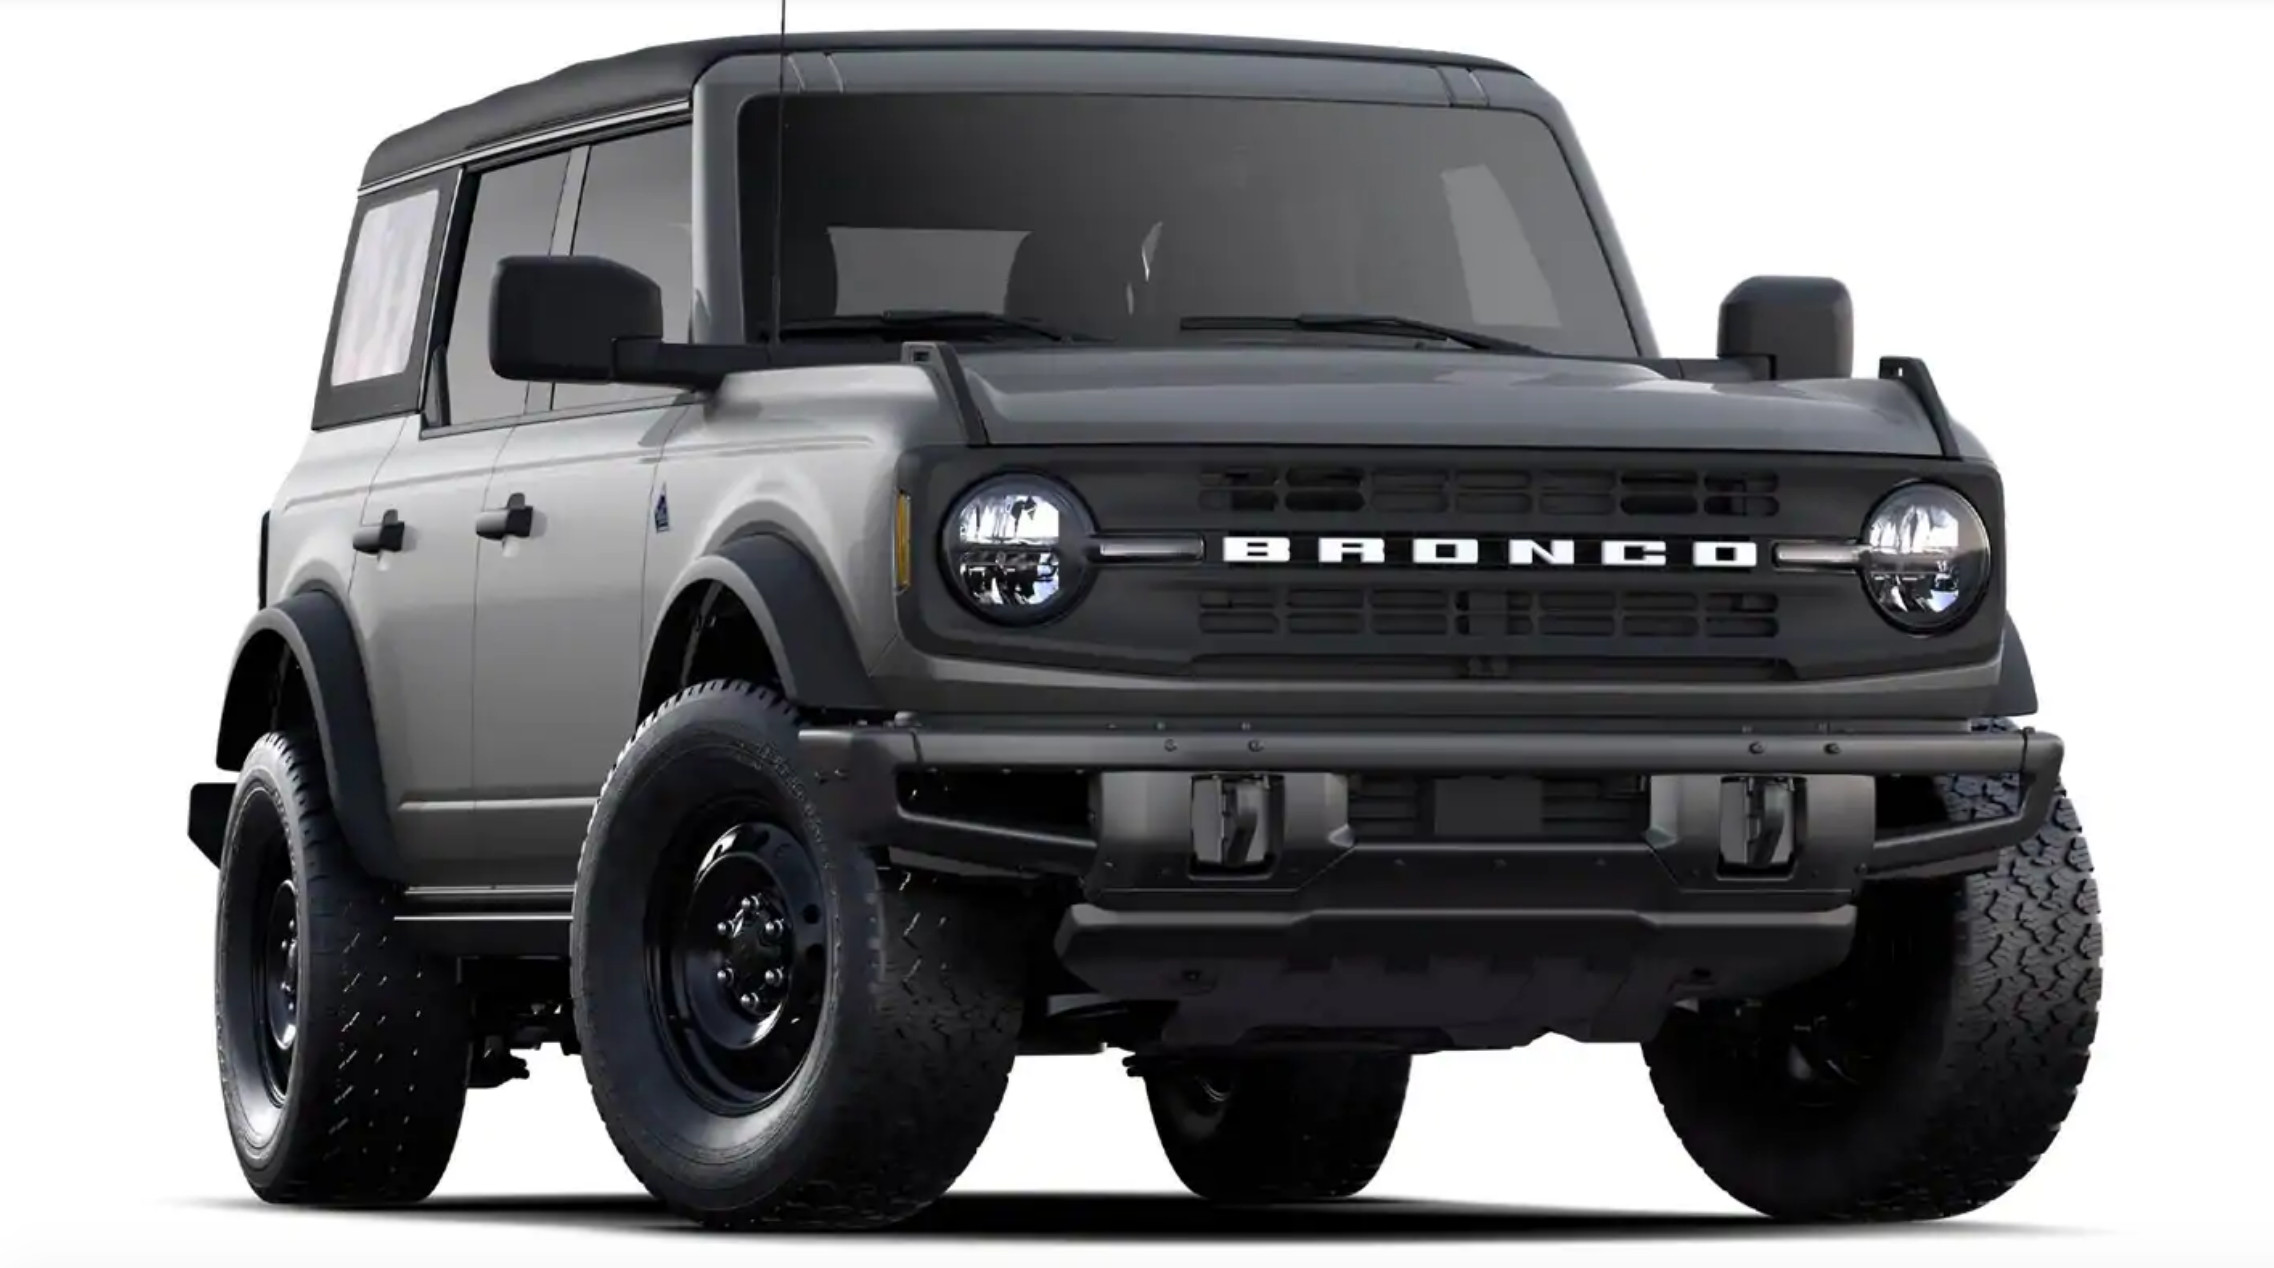 Best Bronco buildoff Our editors weigh in on their ideal SUVs